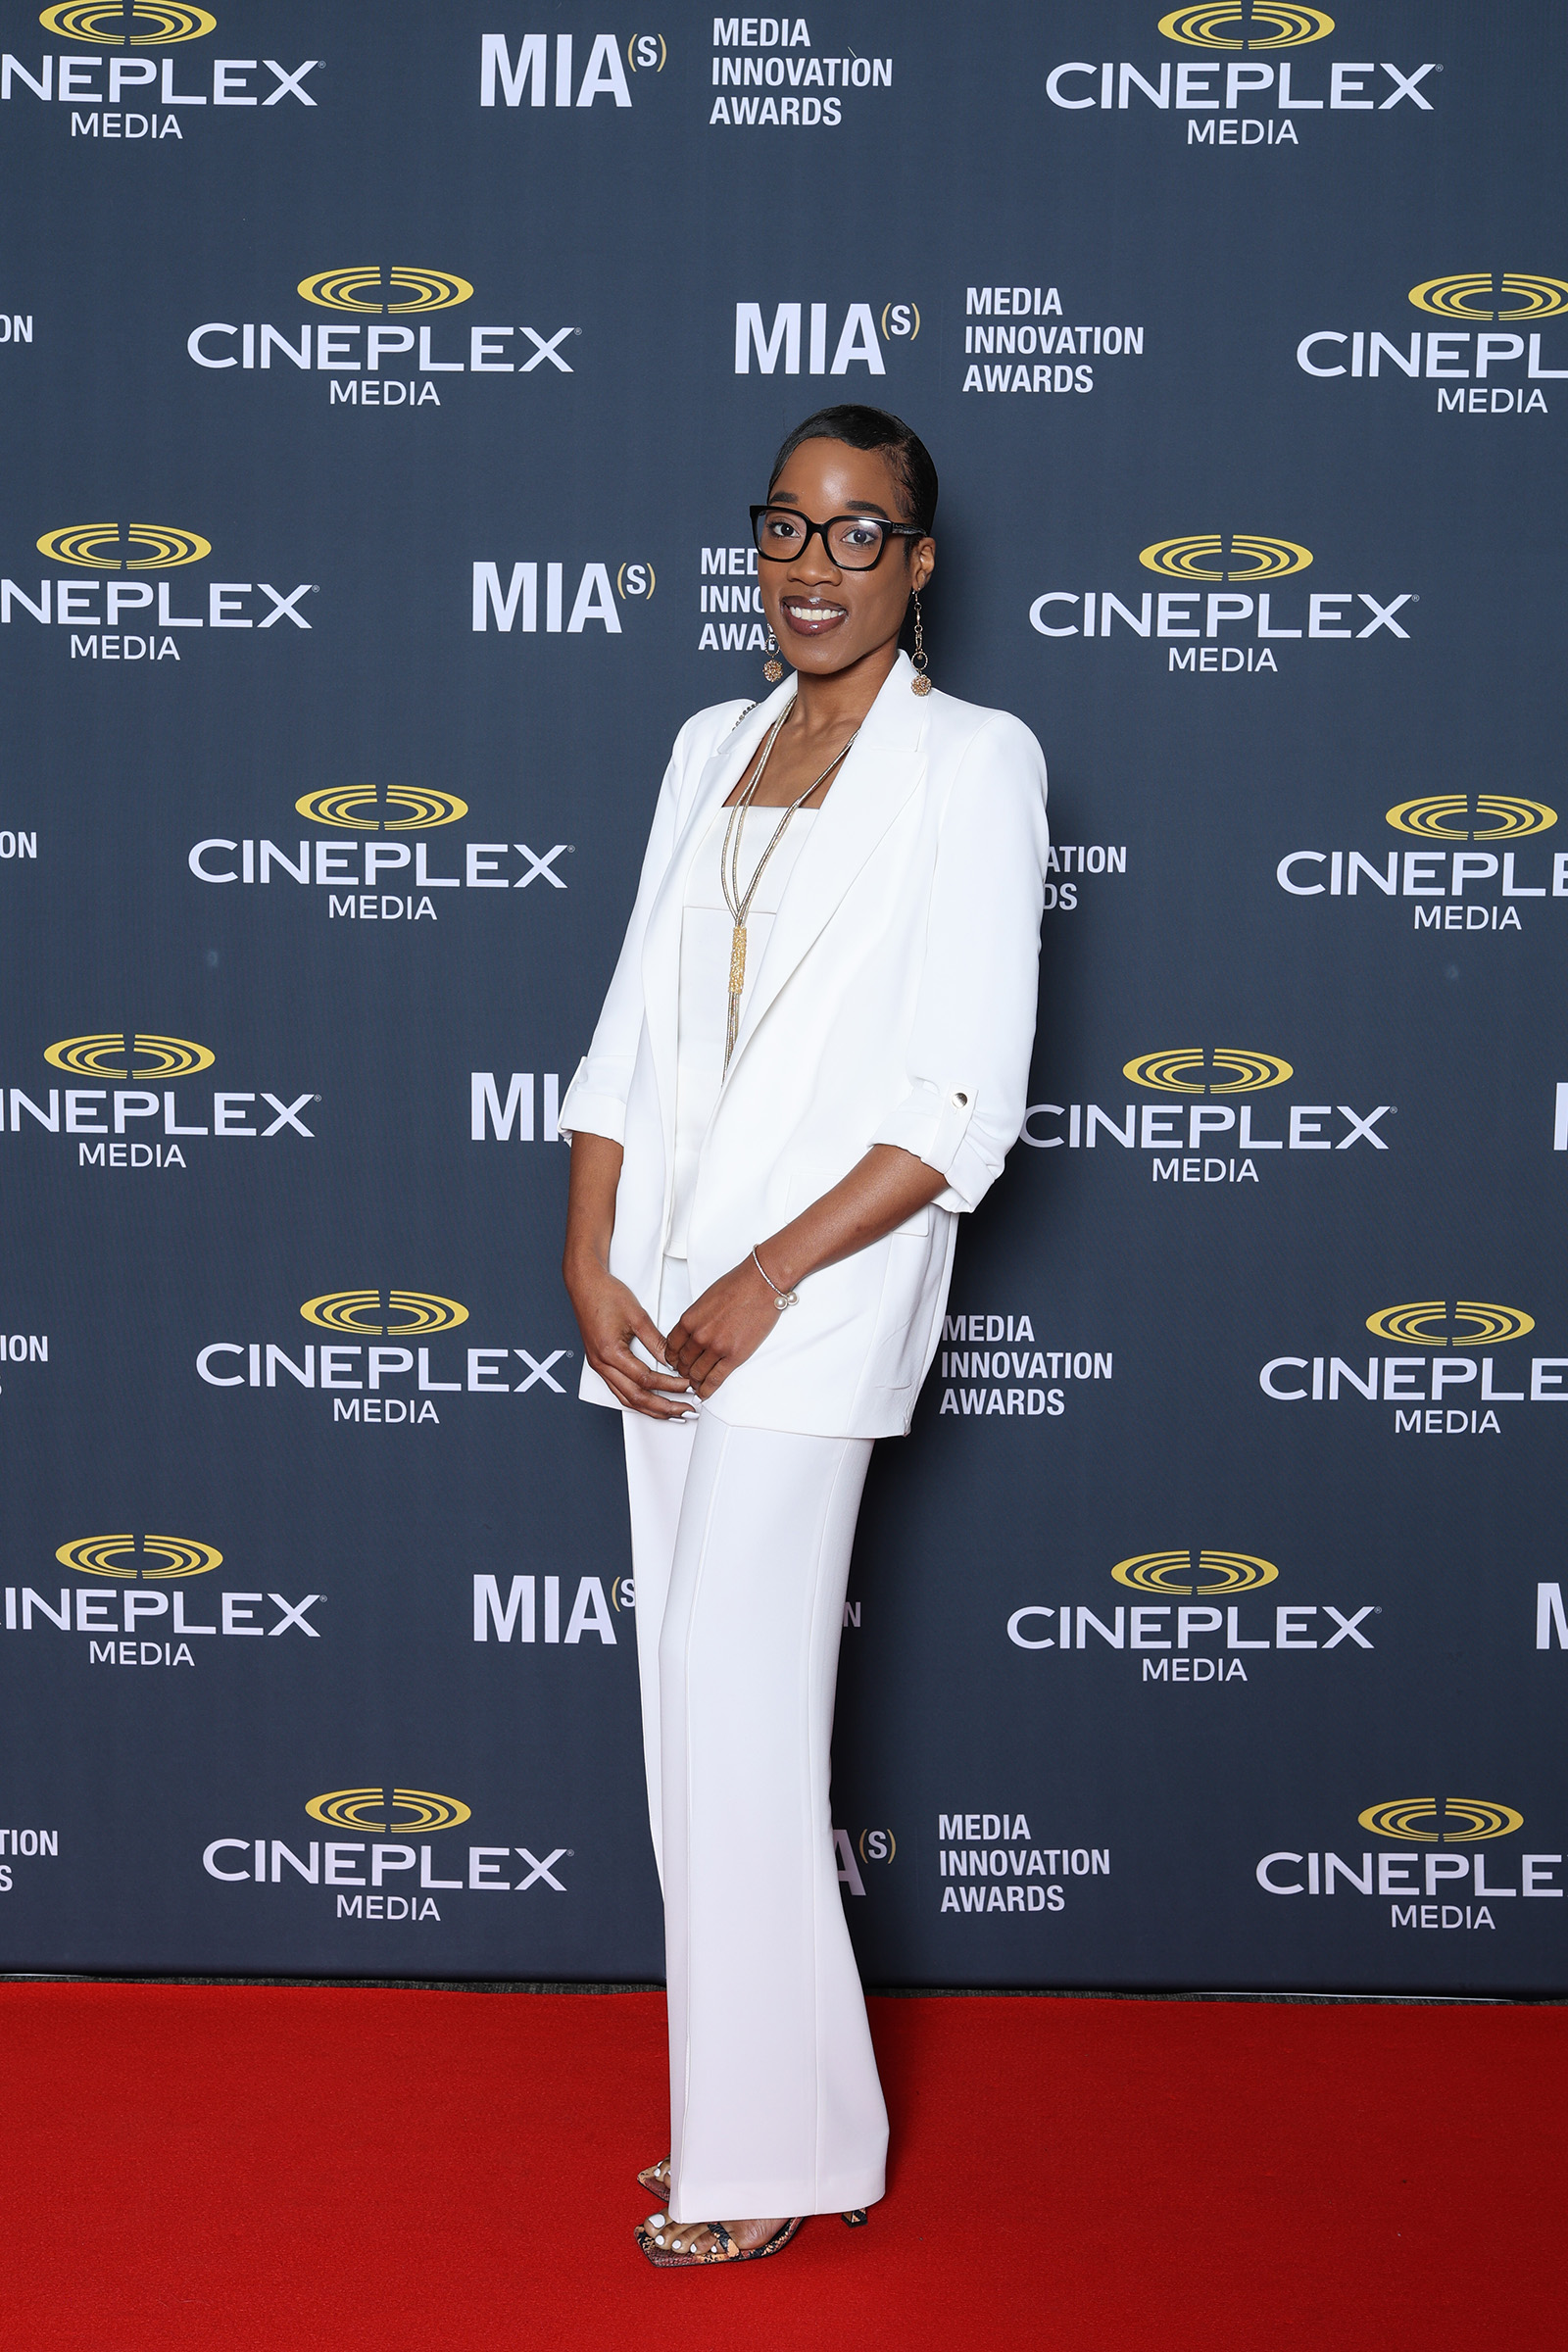 A woman in a white suit gracefully poses on a red carpet, captured through the lens of event photography.